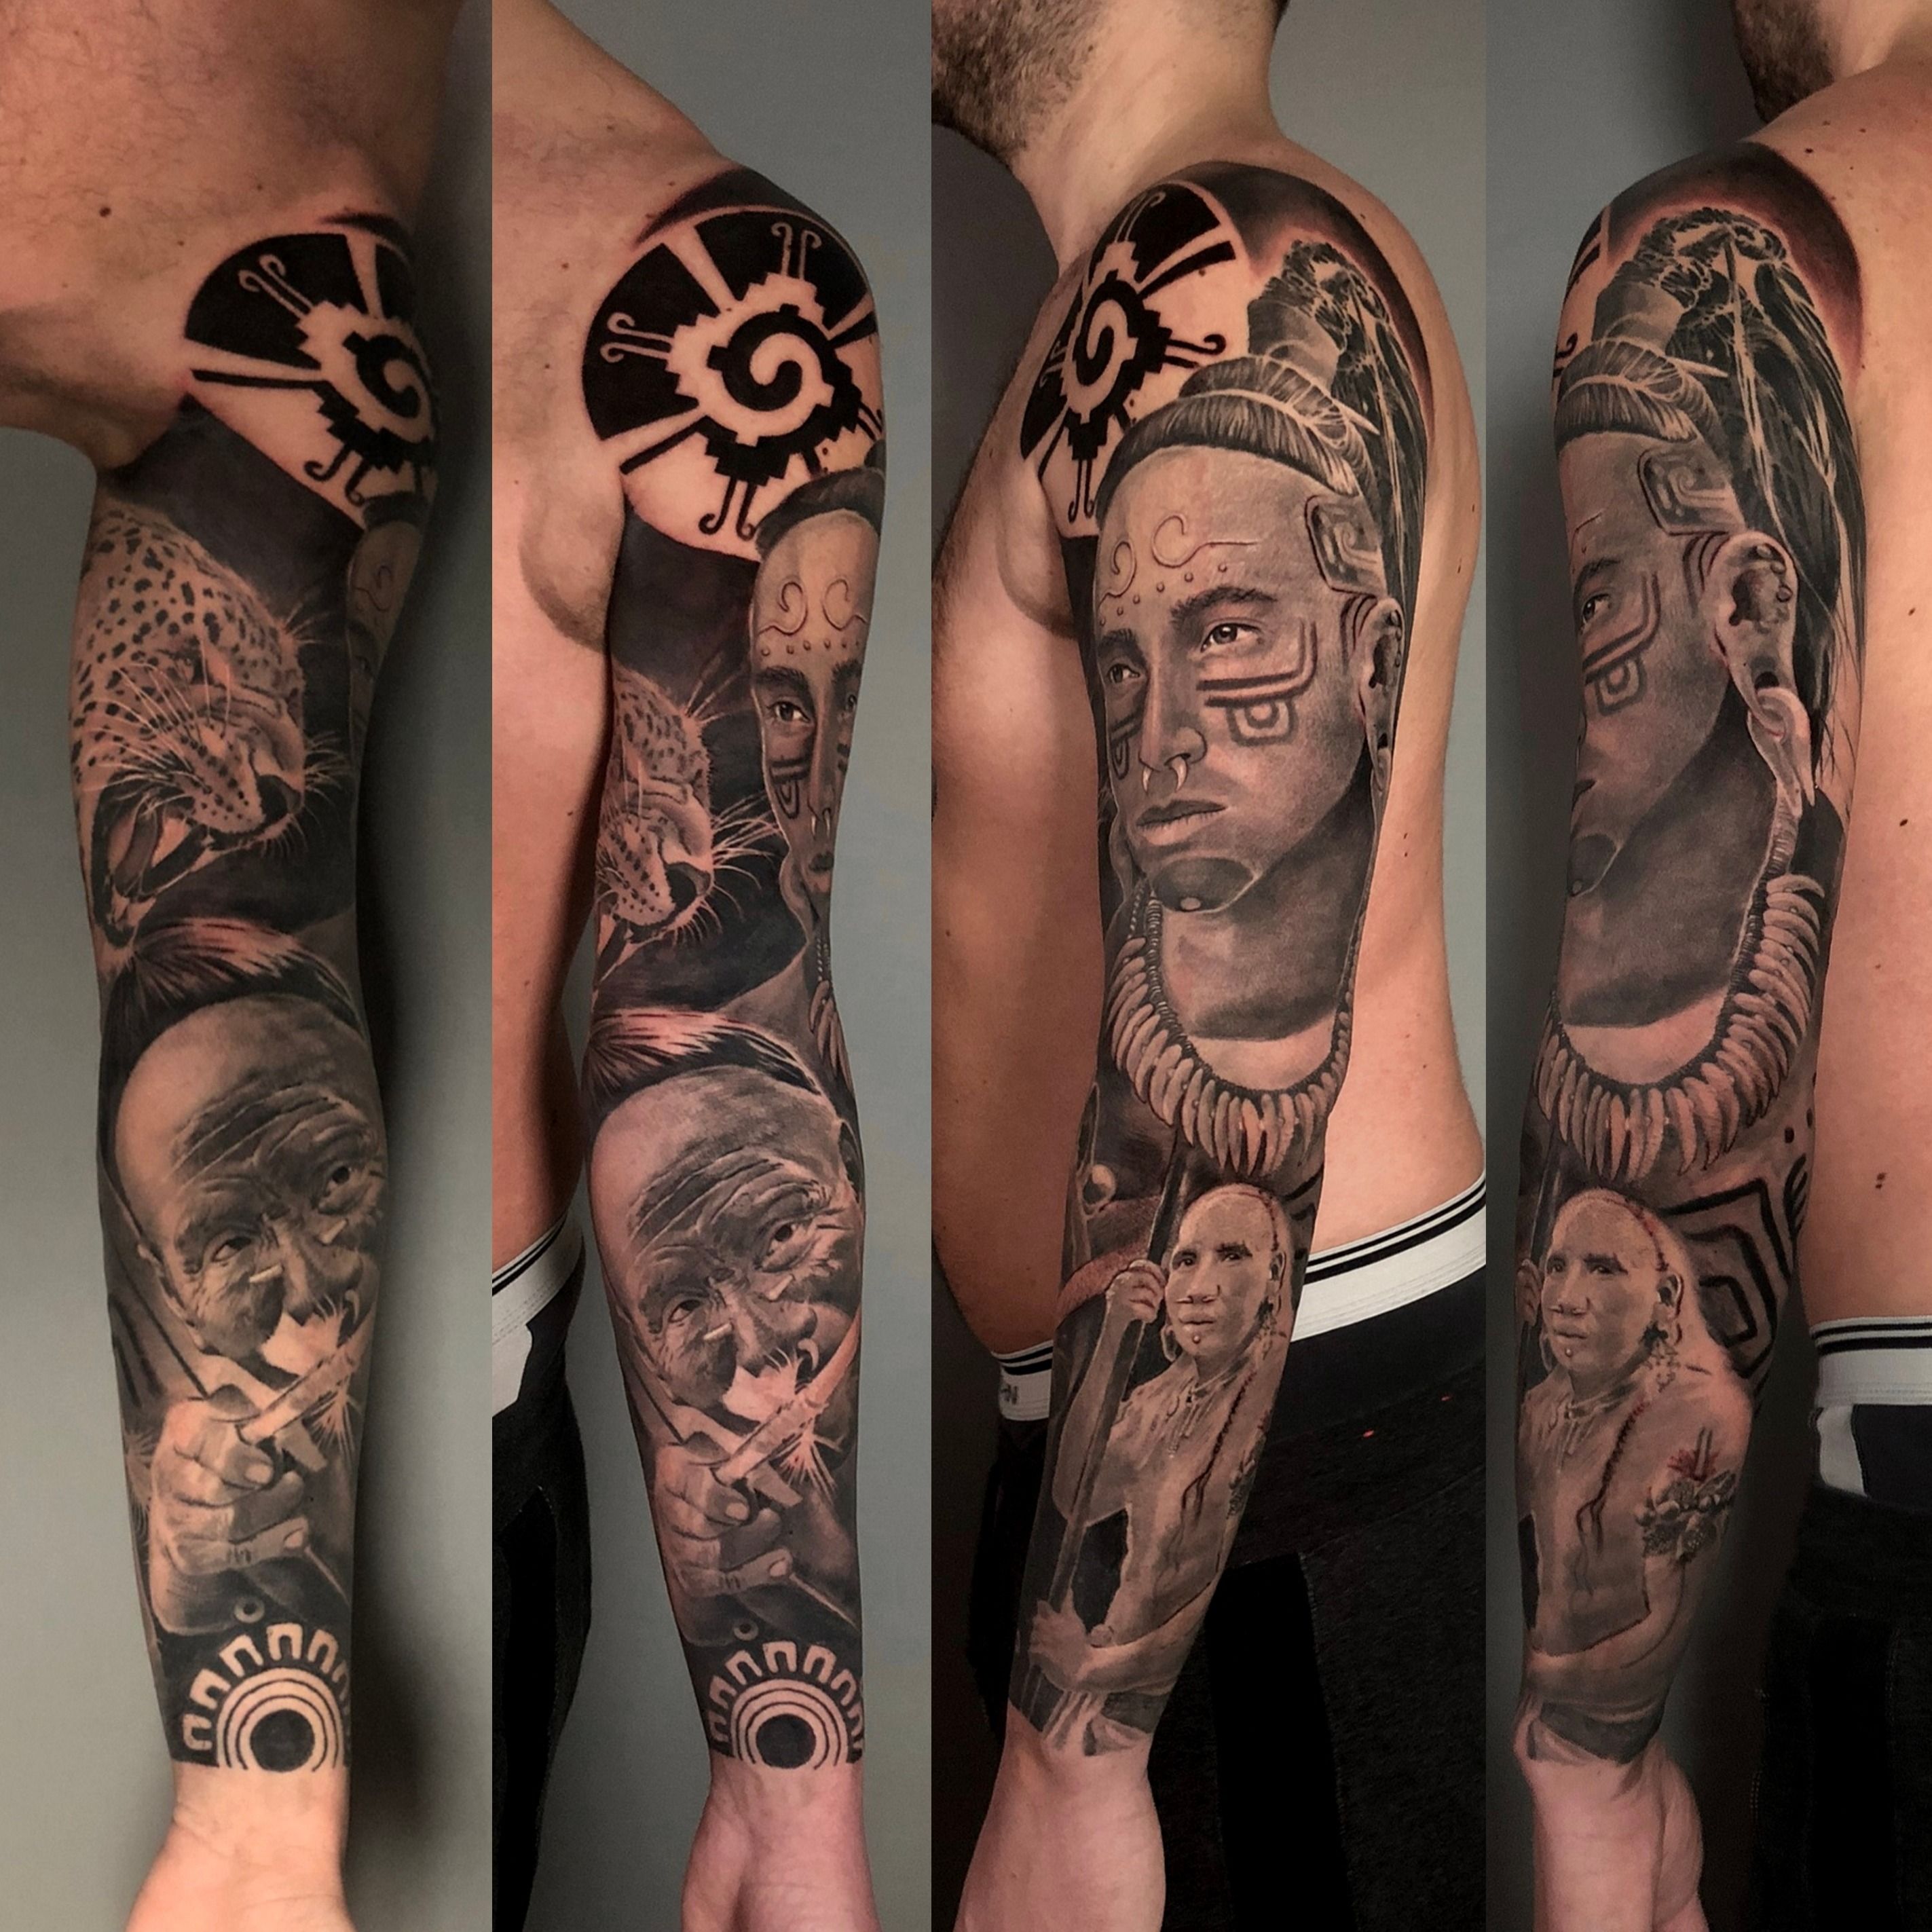 AZTEC full sleeve done at luminatattoostudio Swipe for looking around  this full sleeve  Sponsored by fkirons pantheraink  Instagram